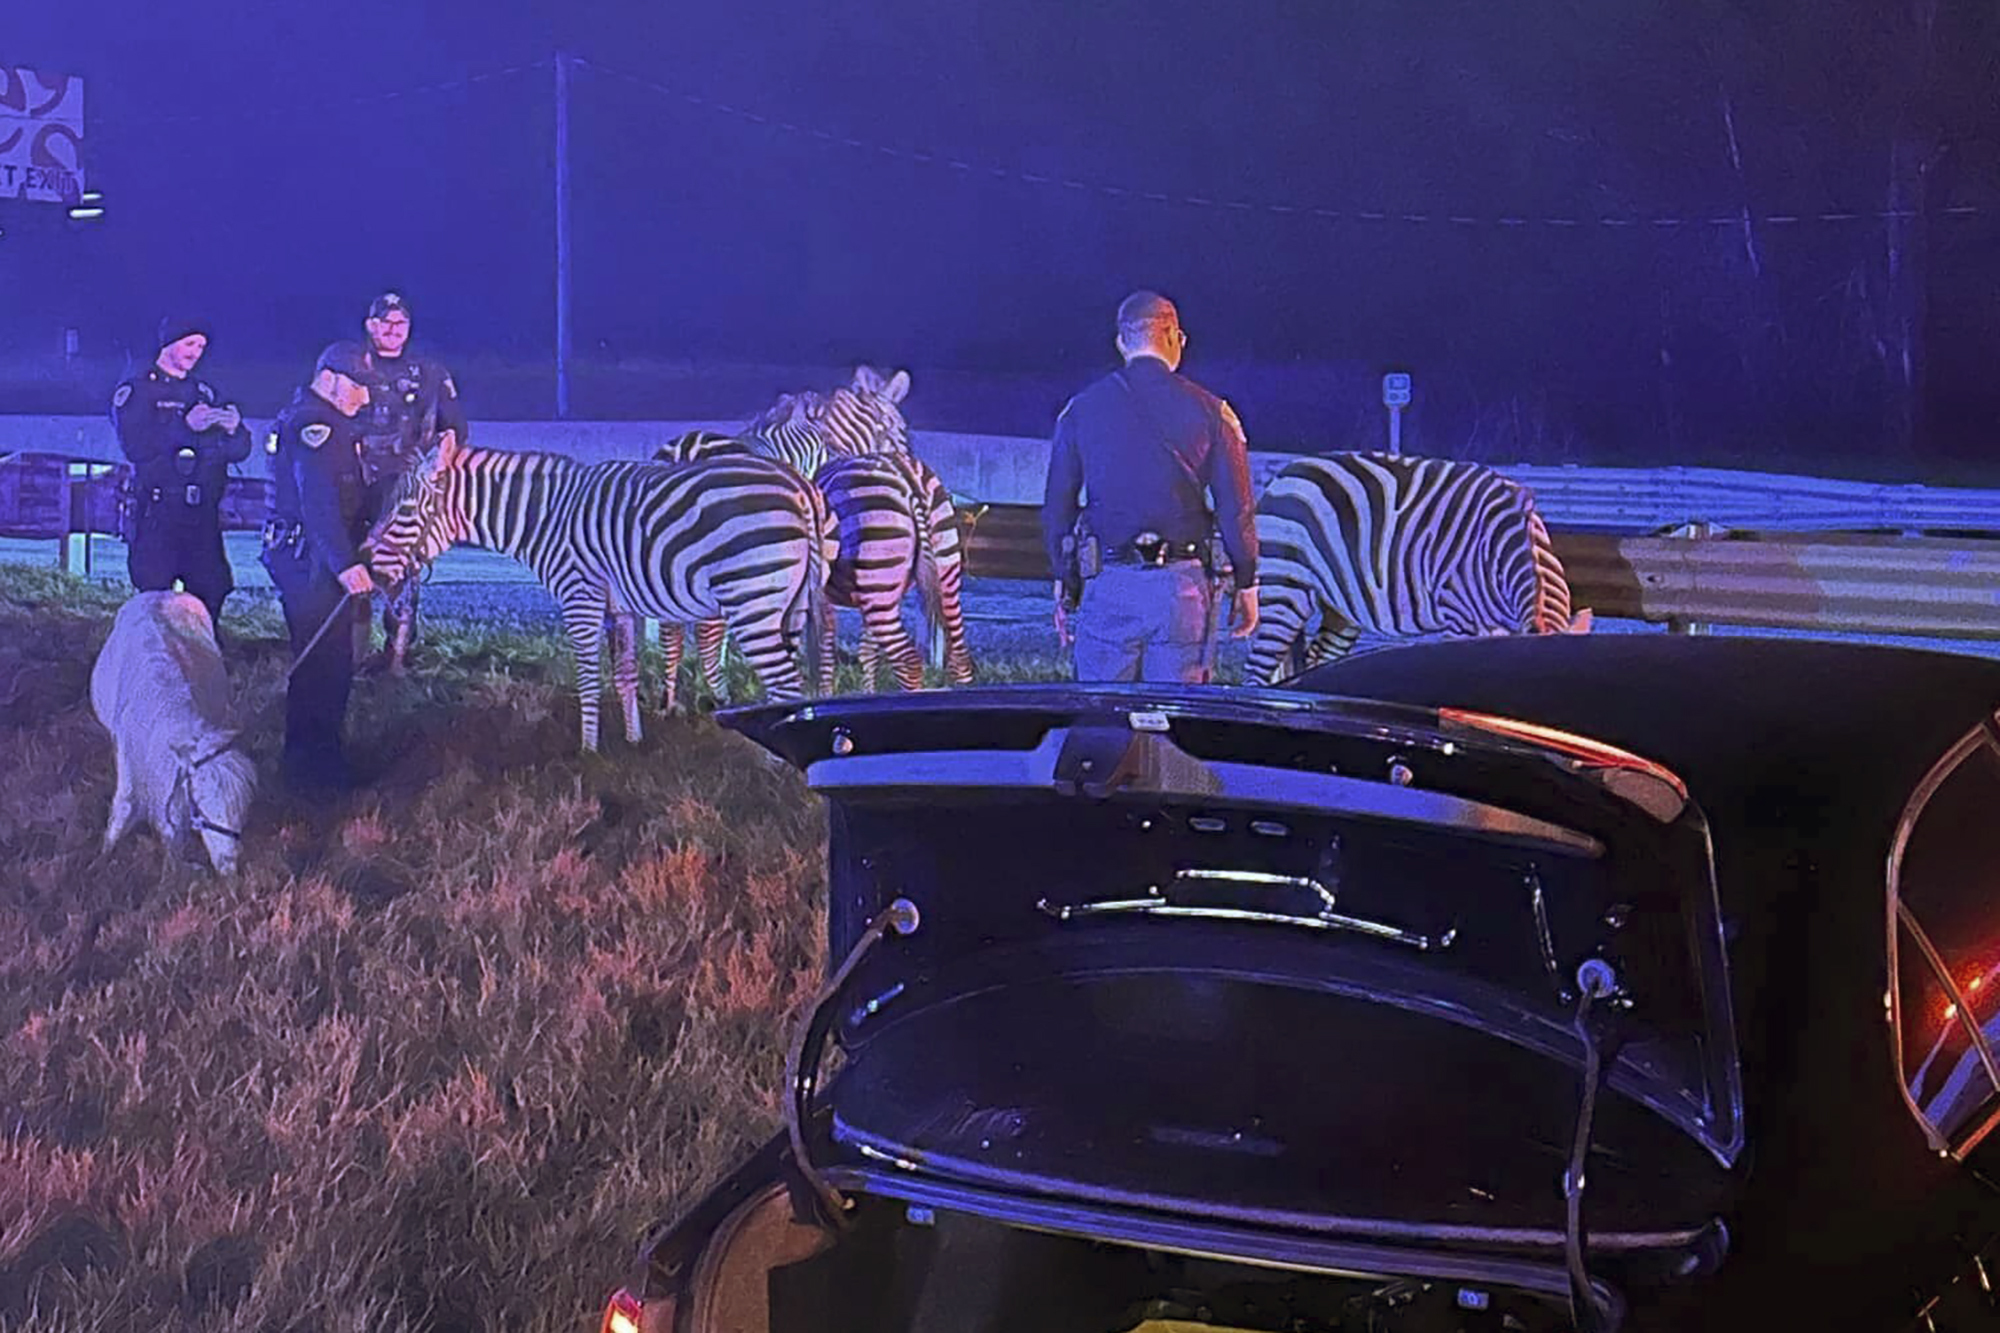 Law Enforcement Rescues Circus Animals from Flaming Trailer on Indiana Interstate